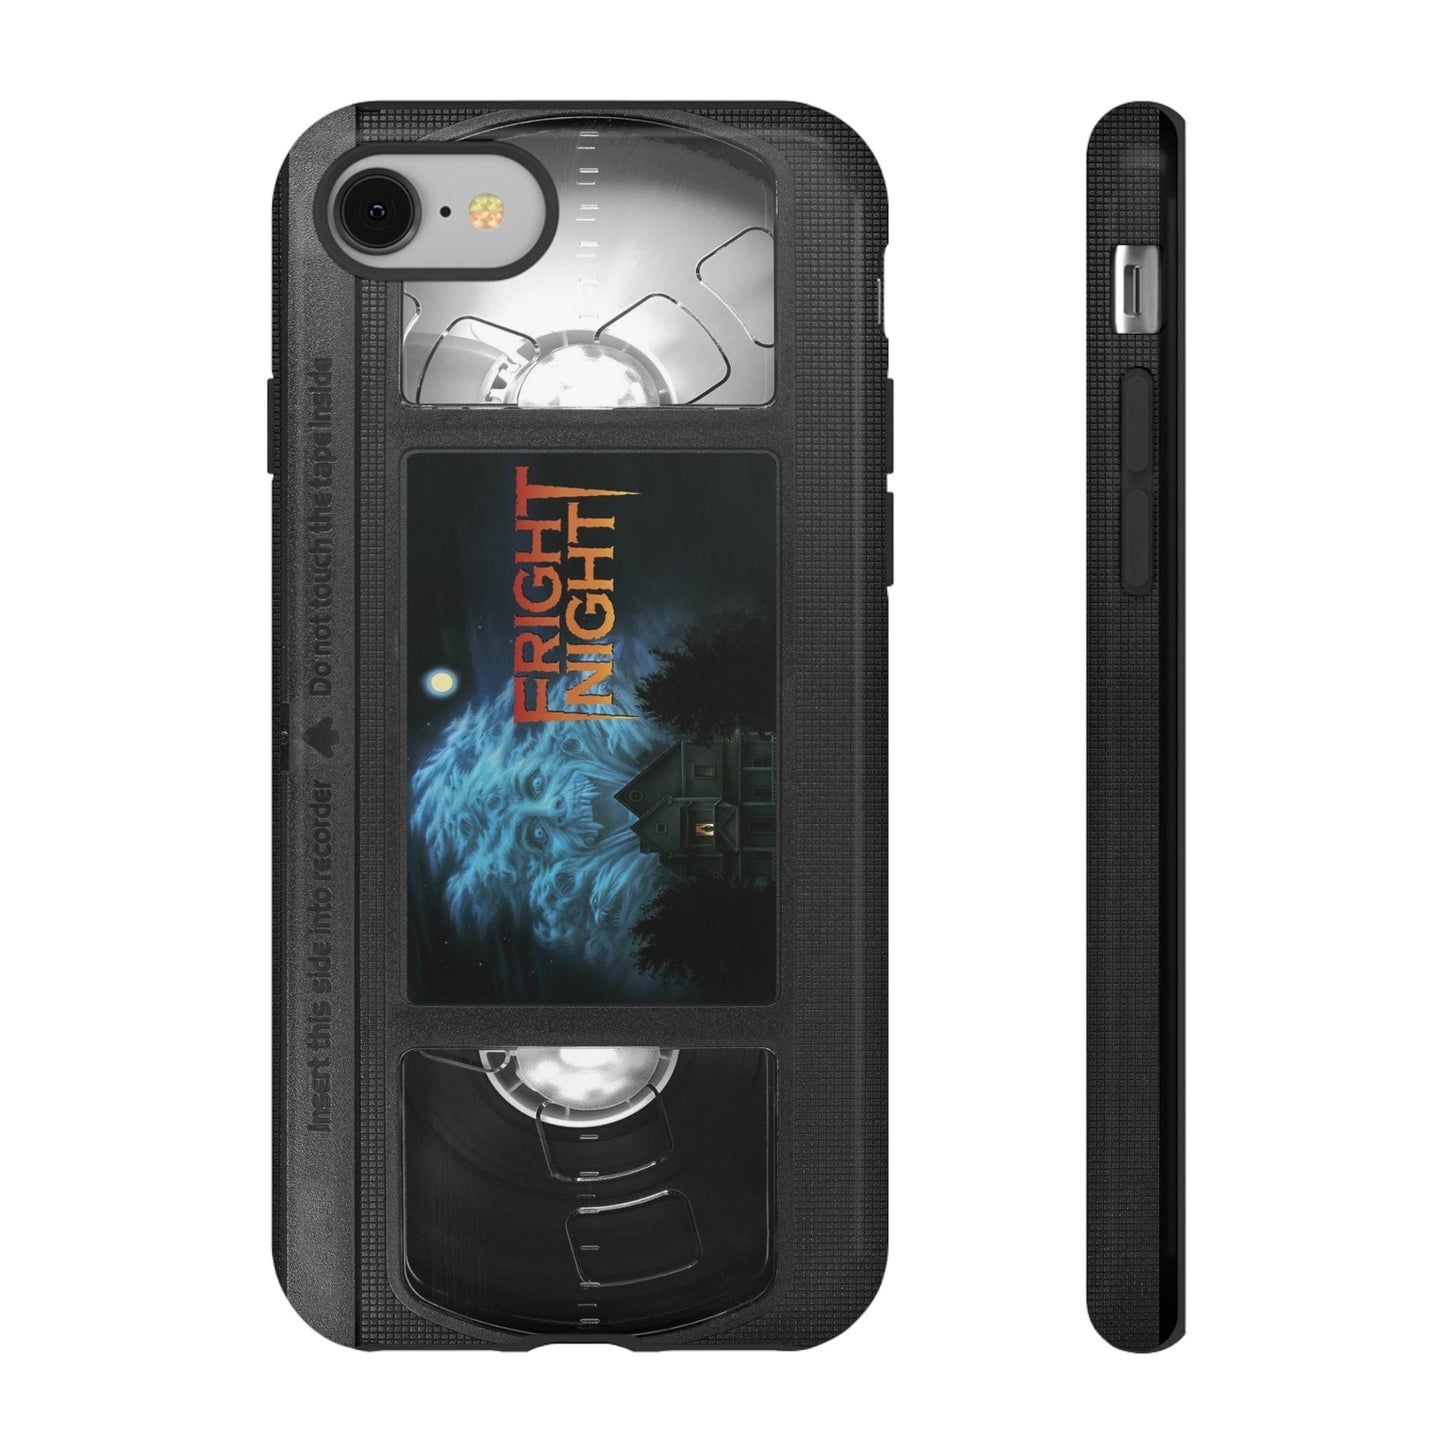 Fright Night Impact Resistant VHS Phone Case